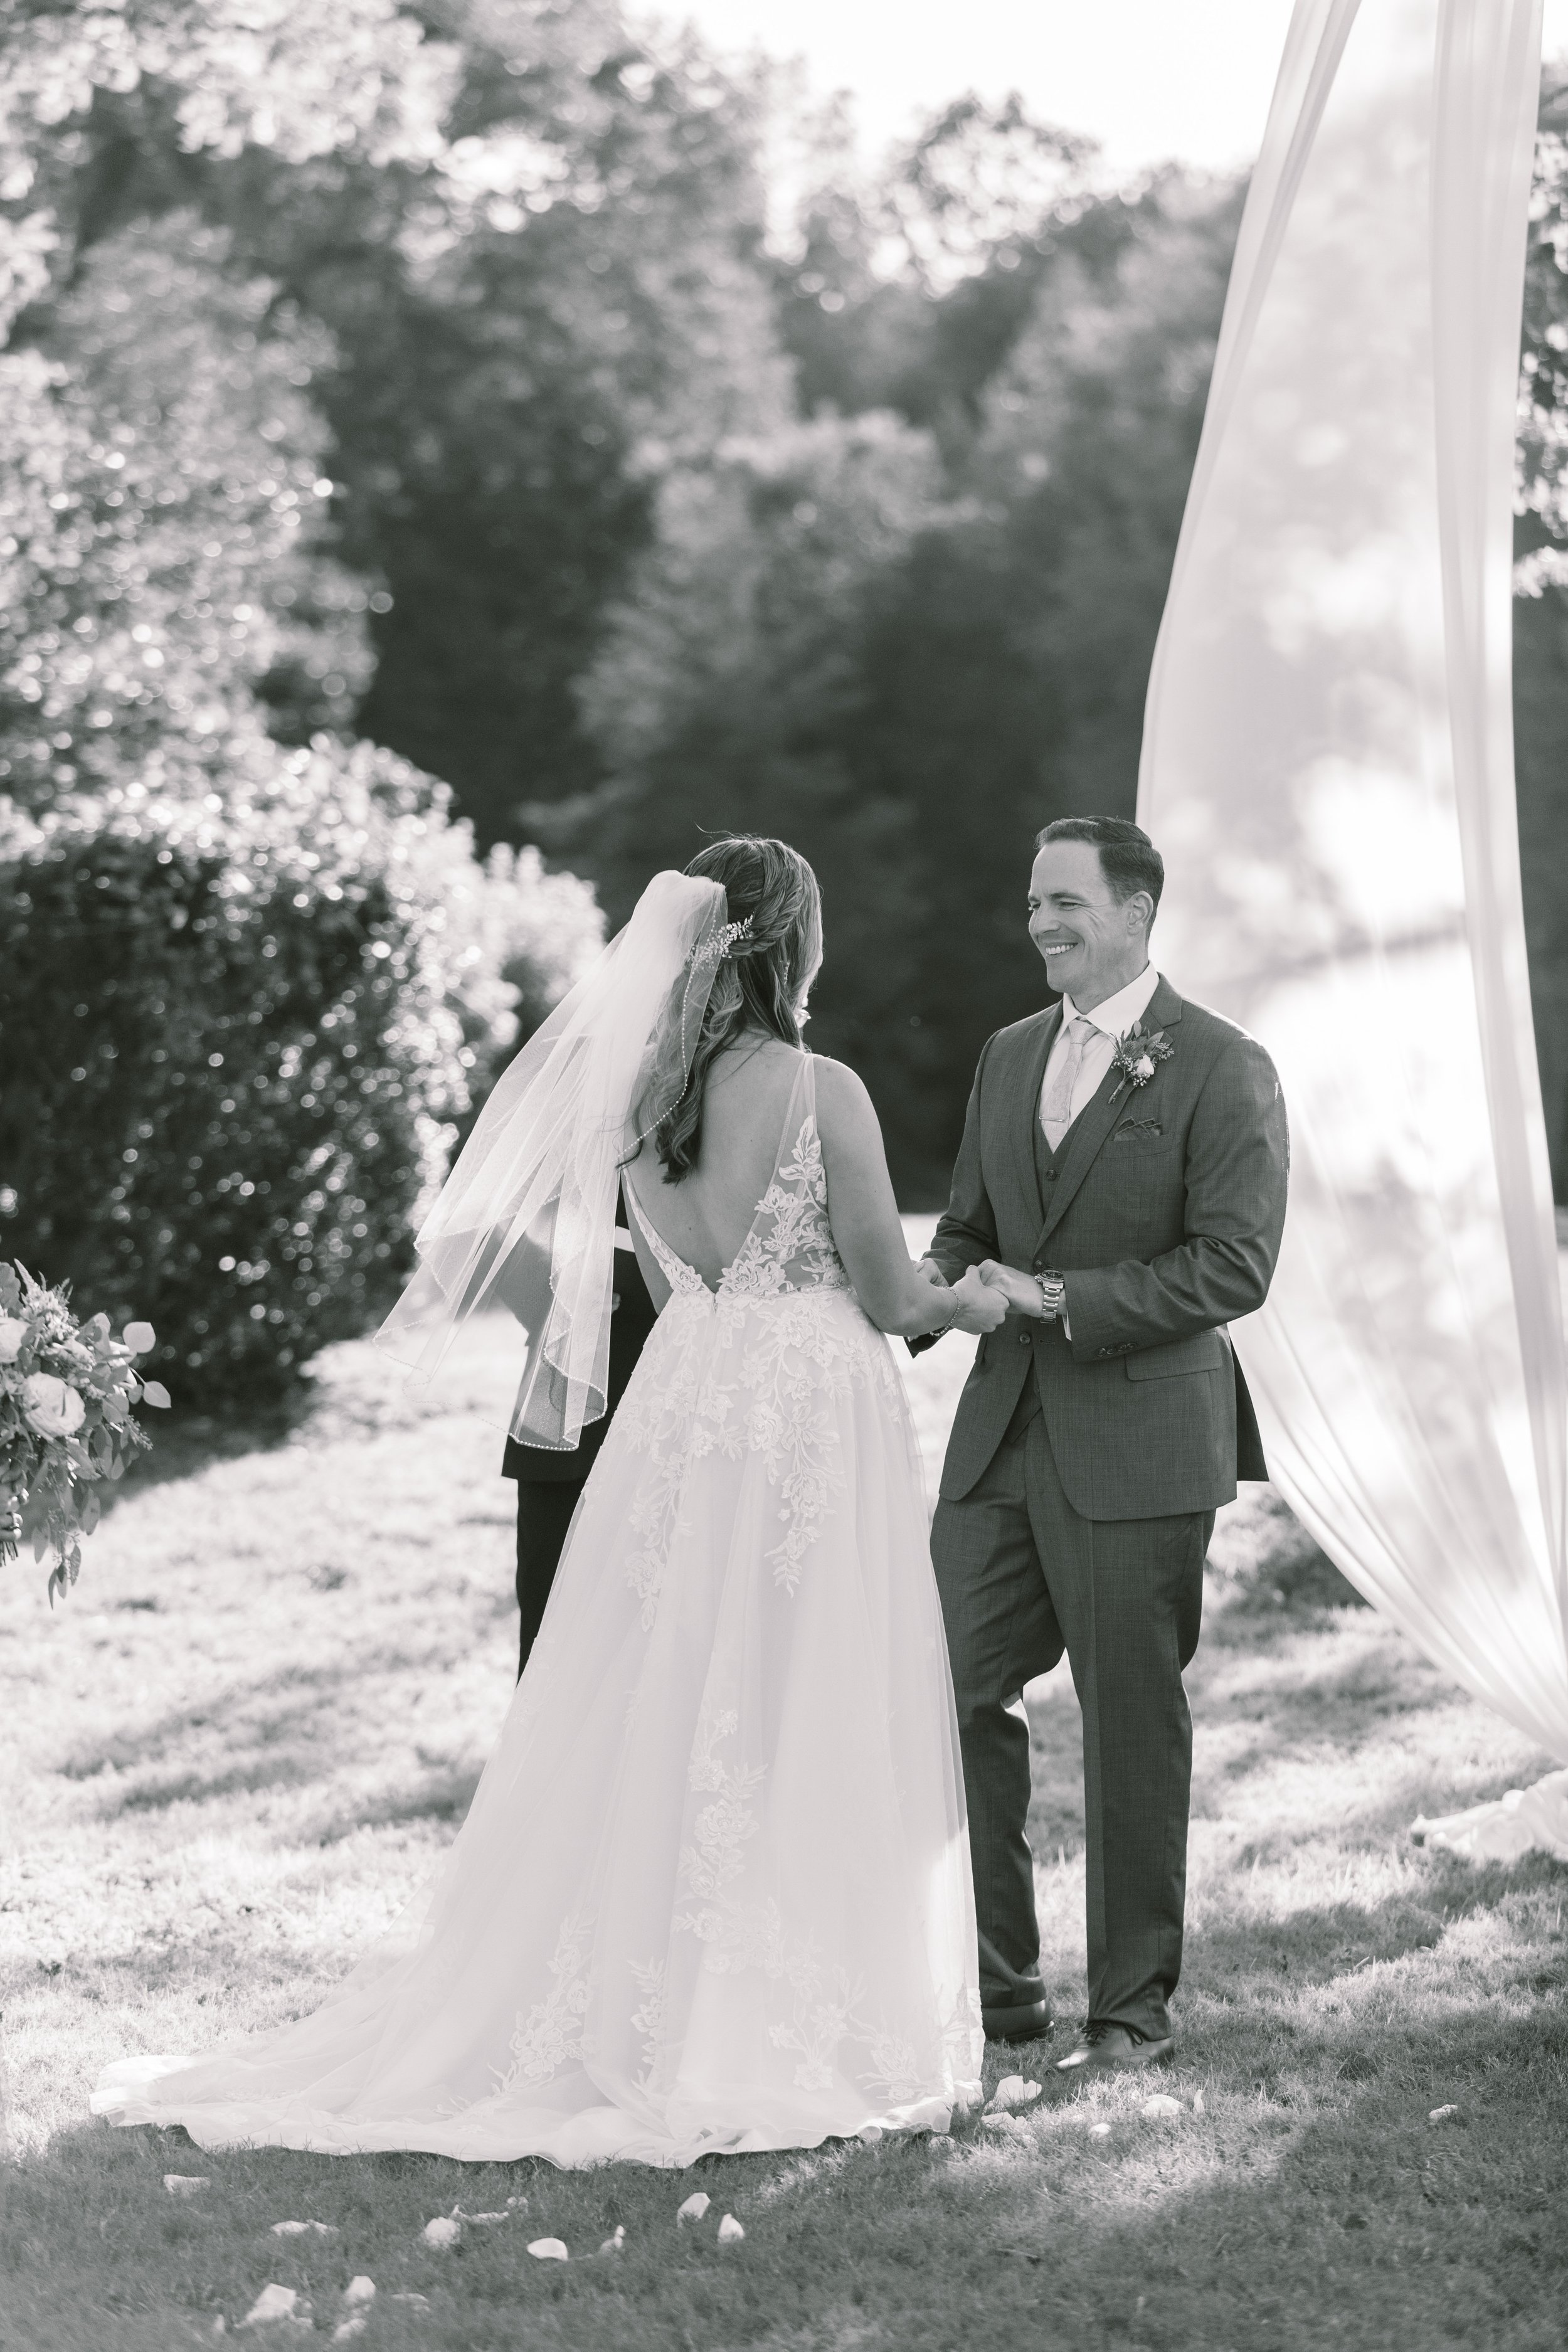  Ceremony Vows at Walnut Hill Wedding Venue Fancy This Photography